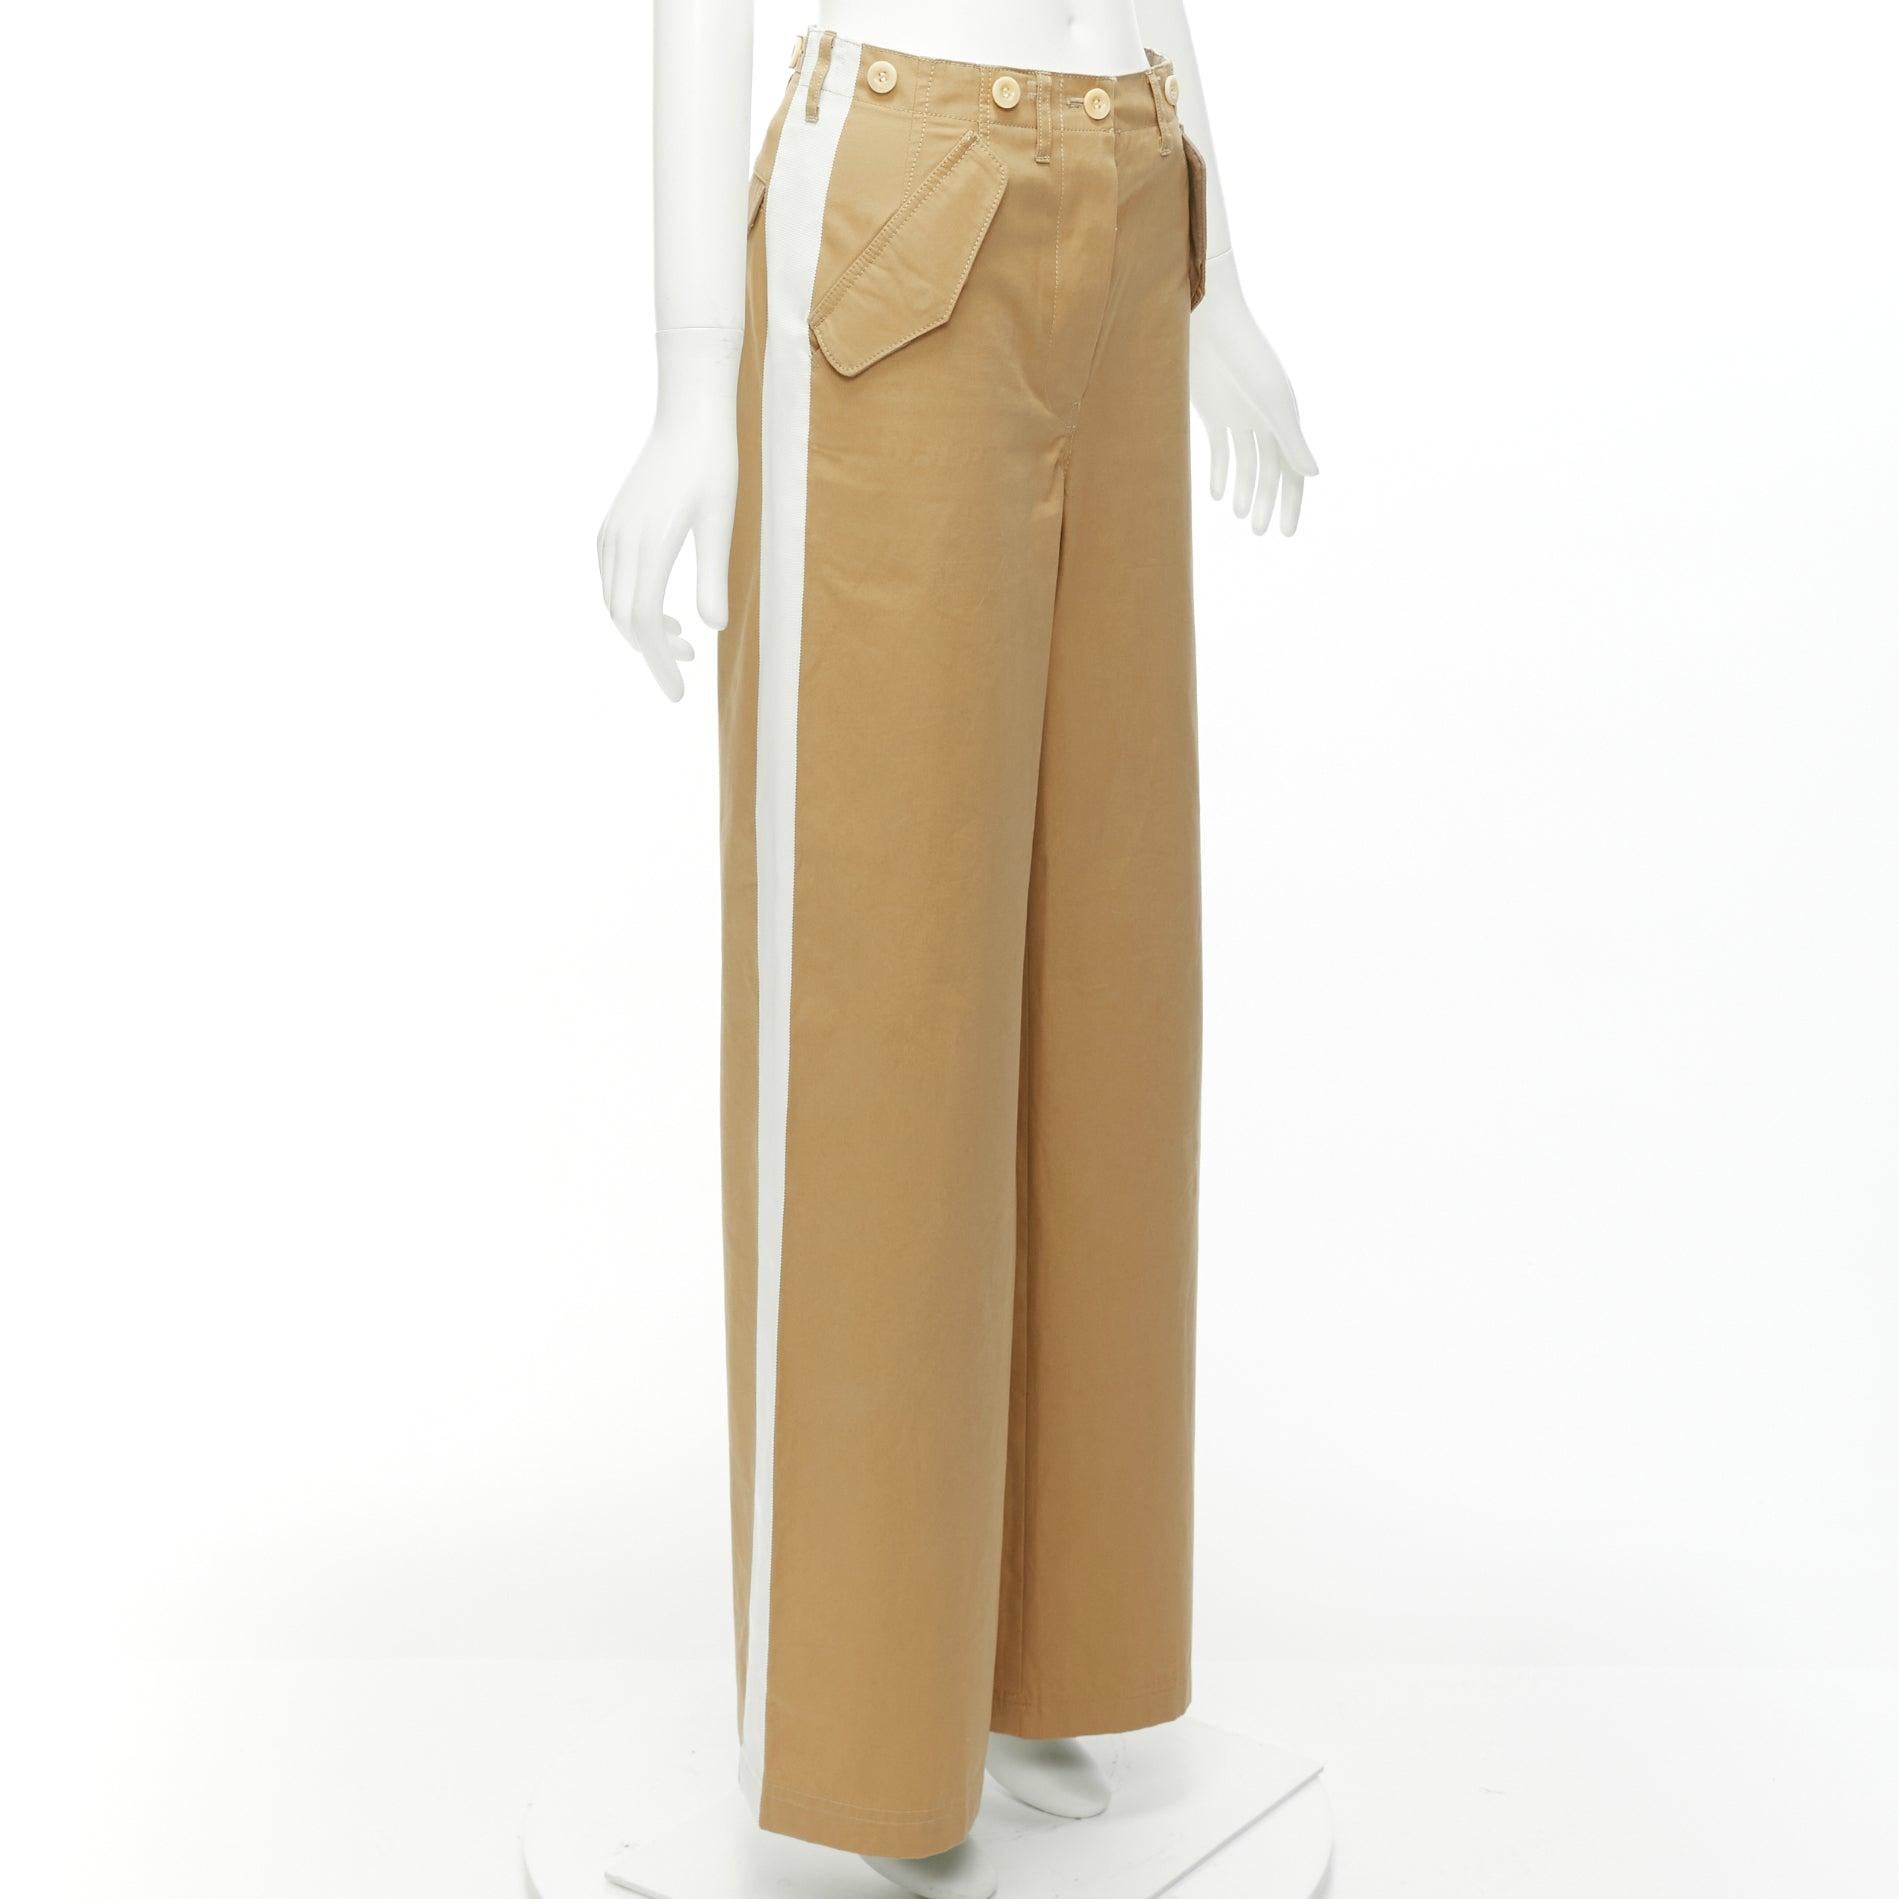 SACAI LUCK beige off white button embellished waistband wide cargo pants
Reference: NKLL/A00191
Brand: Sacai
Designer: Chitose Abe
Collection: LUCK
Material: Feels like cotton
Color: Beige, Off White
Pattern: Solid
Closure: Button Fly
Lining: Beige